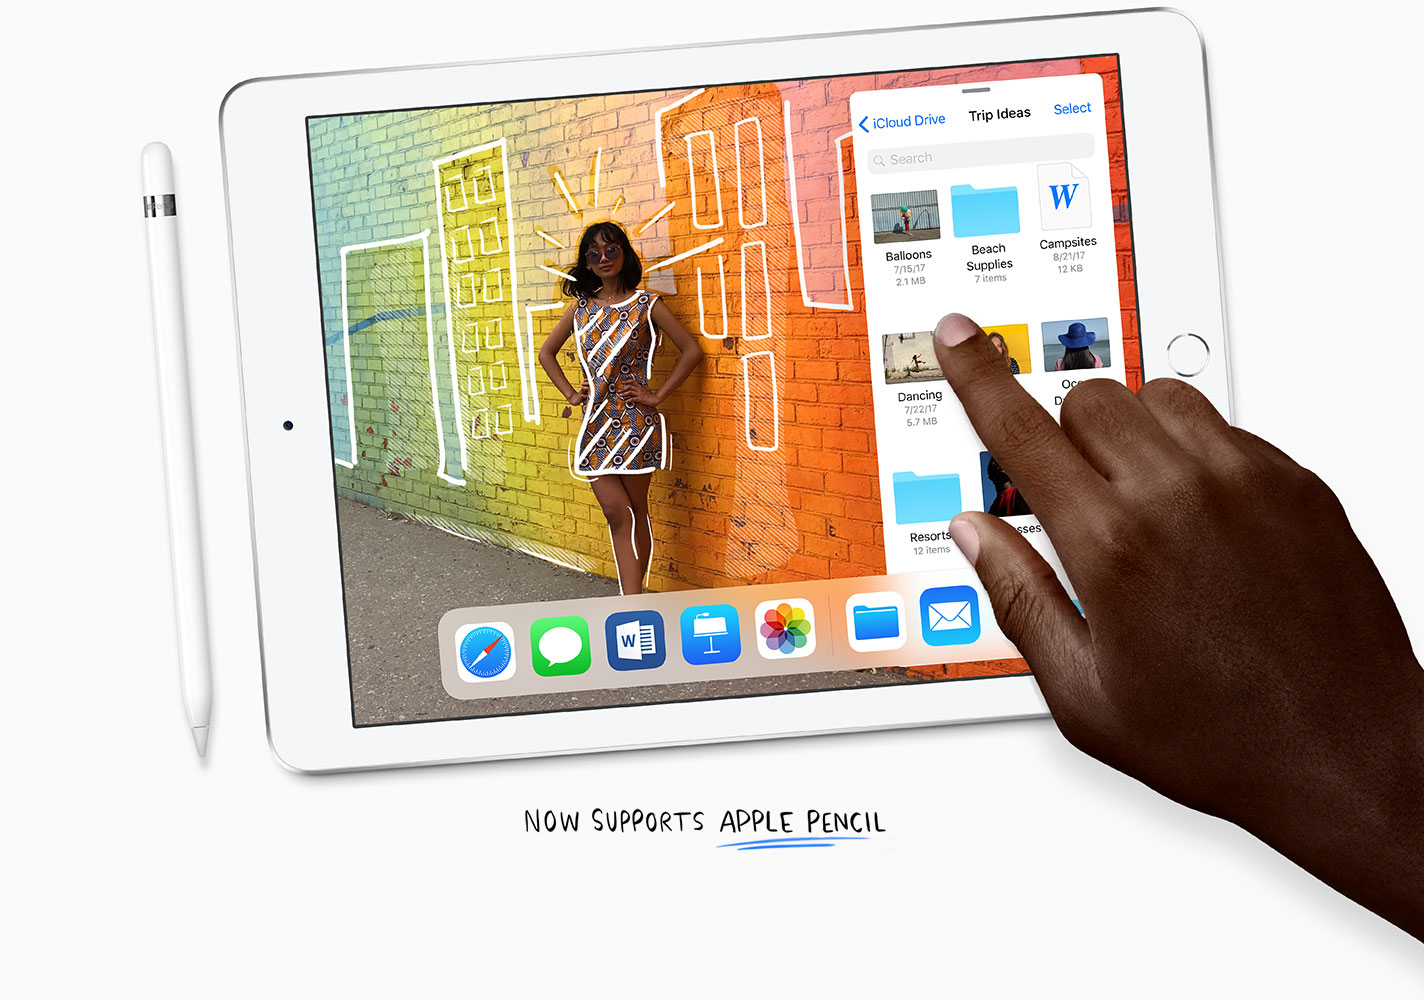 iPad. Now supports Apple Pencil